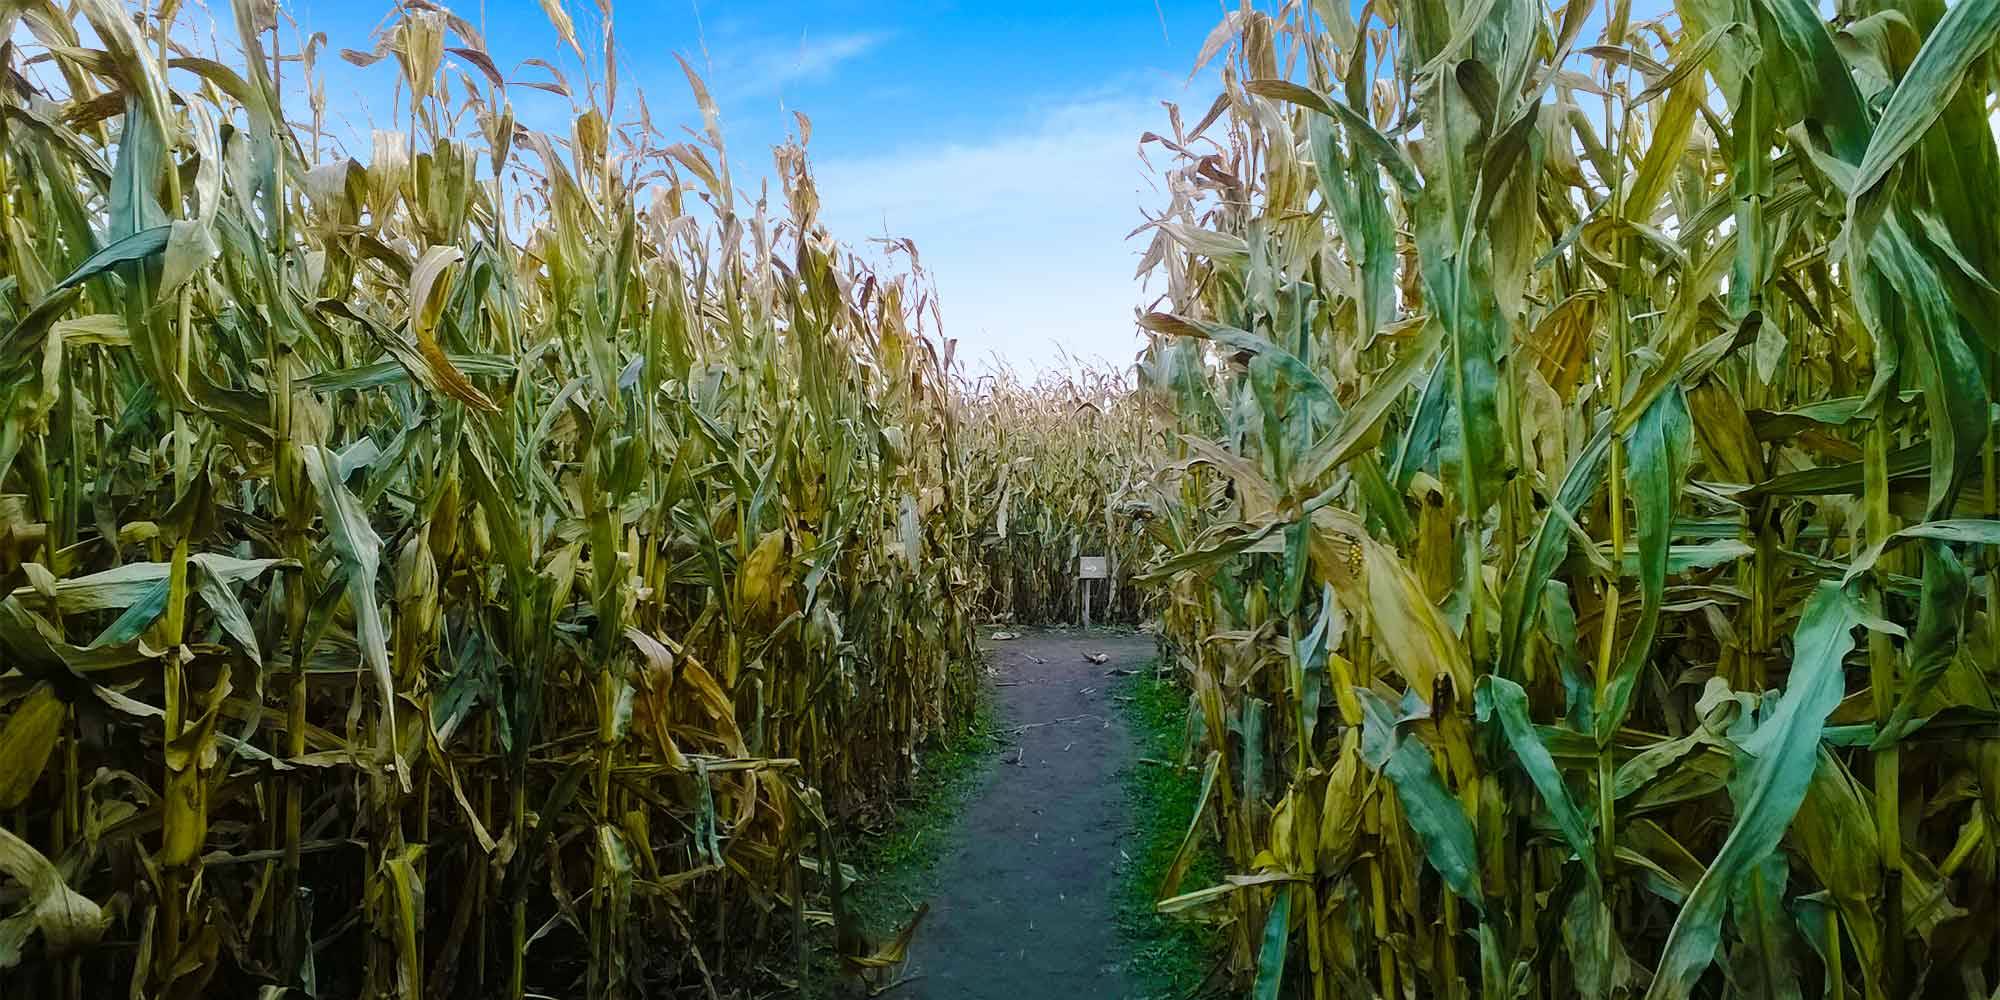 Explore our HUGE corn maze at Piney Acres Farm in Fortville, Indiana